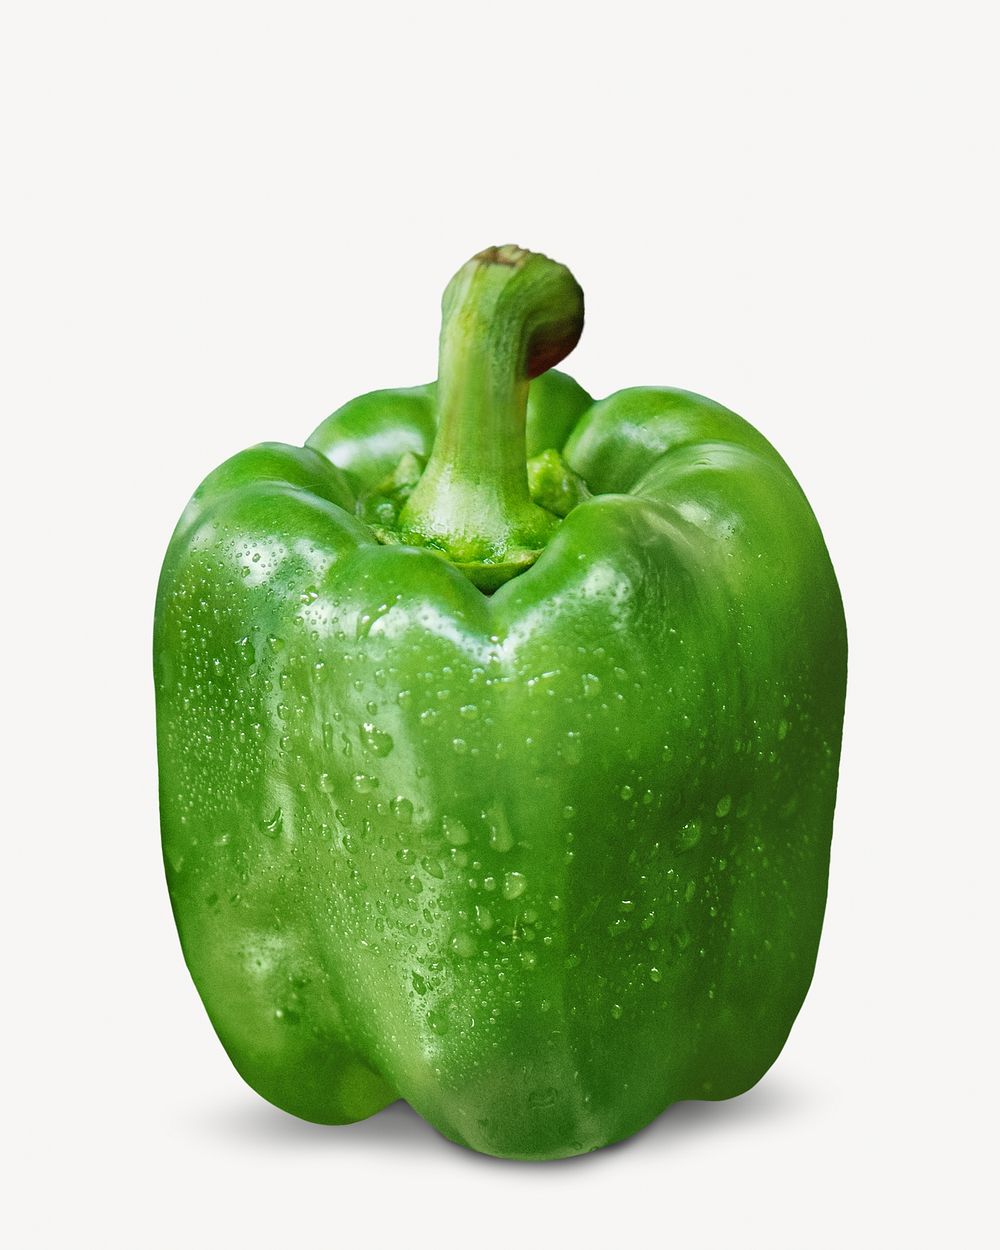 Green bell pepper isolated image